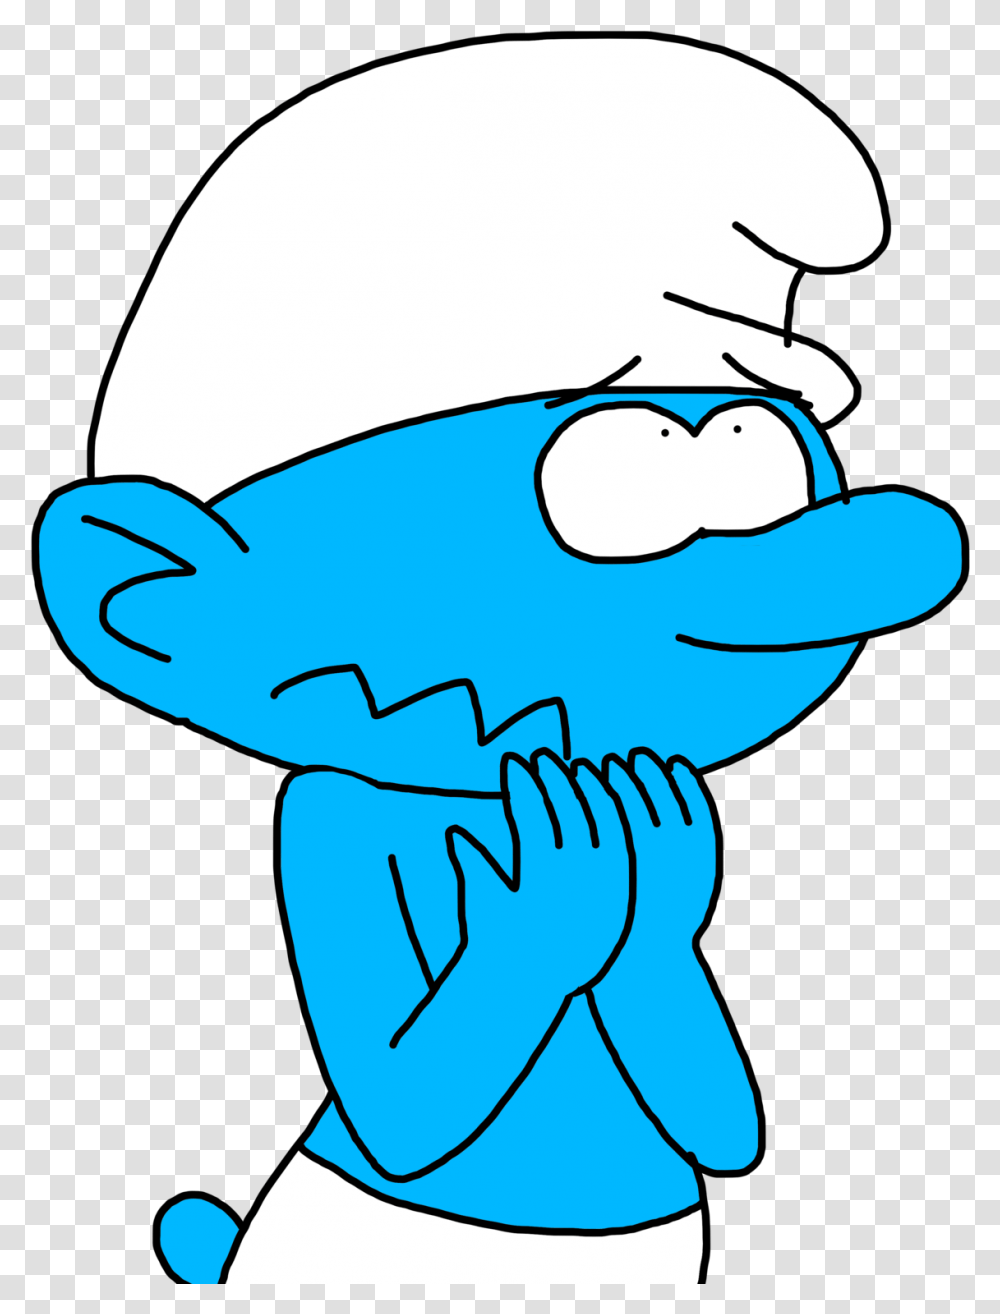 Scaredy Smurf By Marcospower1996 Scaredy Smurf By, Mouth, Lip, Helmet Transparent Png